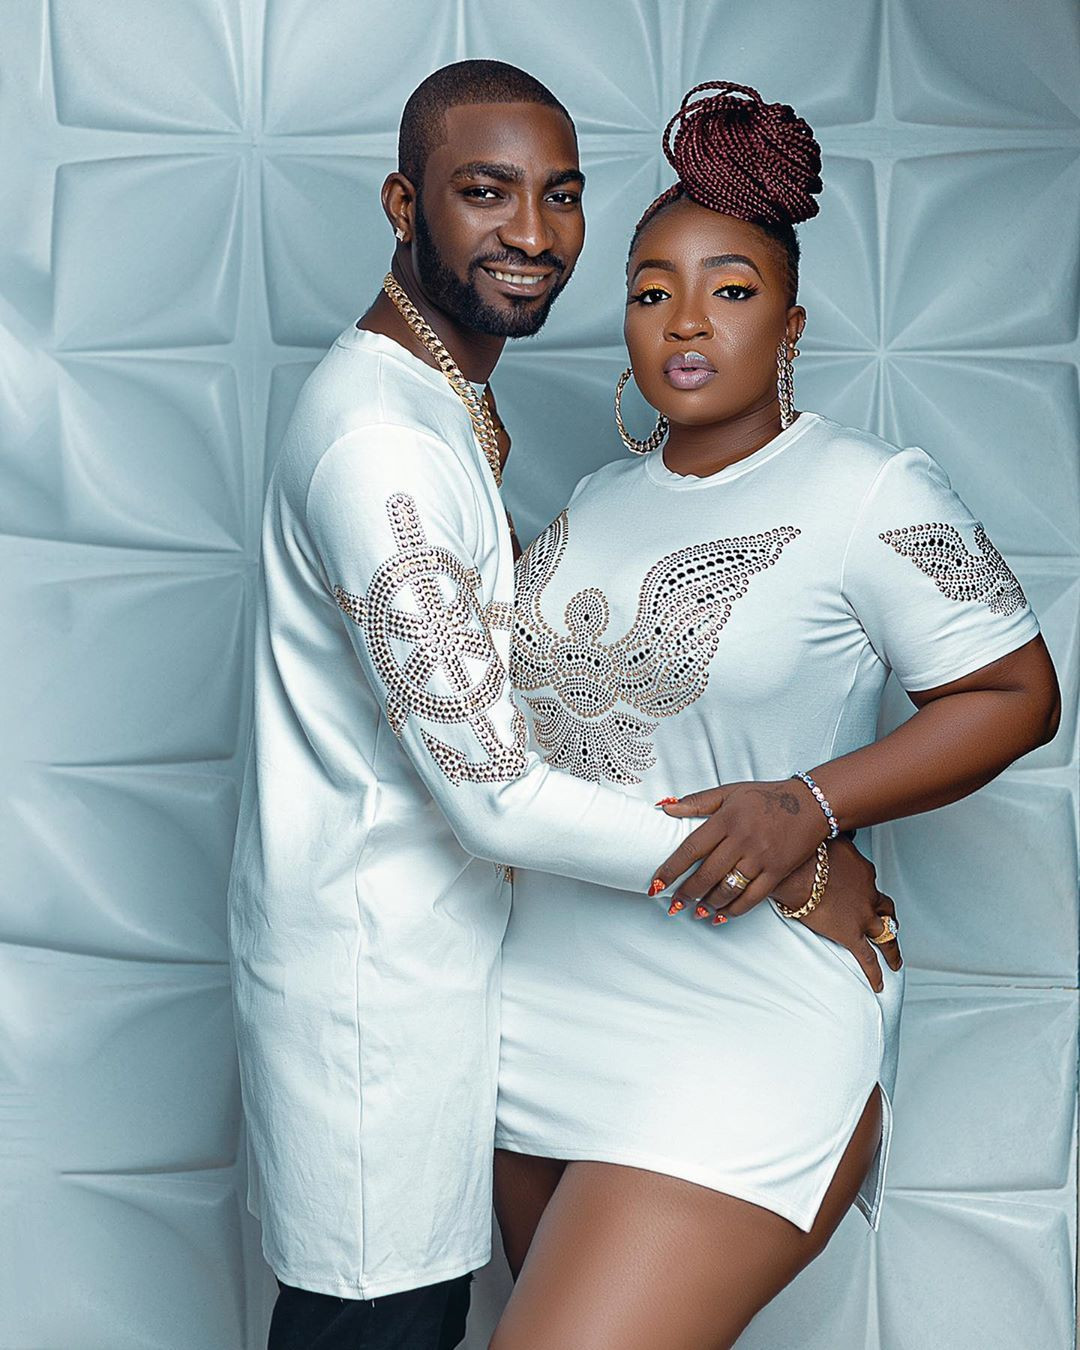 You no dey go anywhere, sit down - Anita Joseph's husband hilariously reacts to her asking if she can go for BBNaija